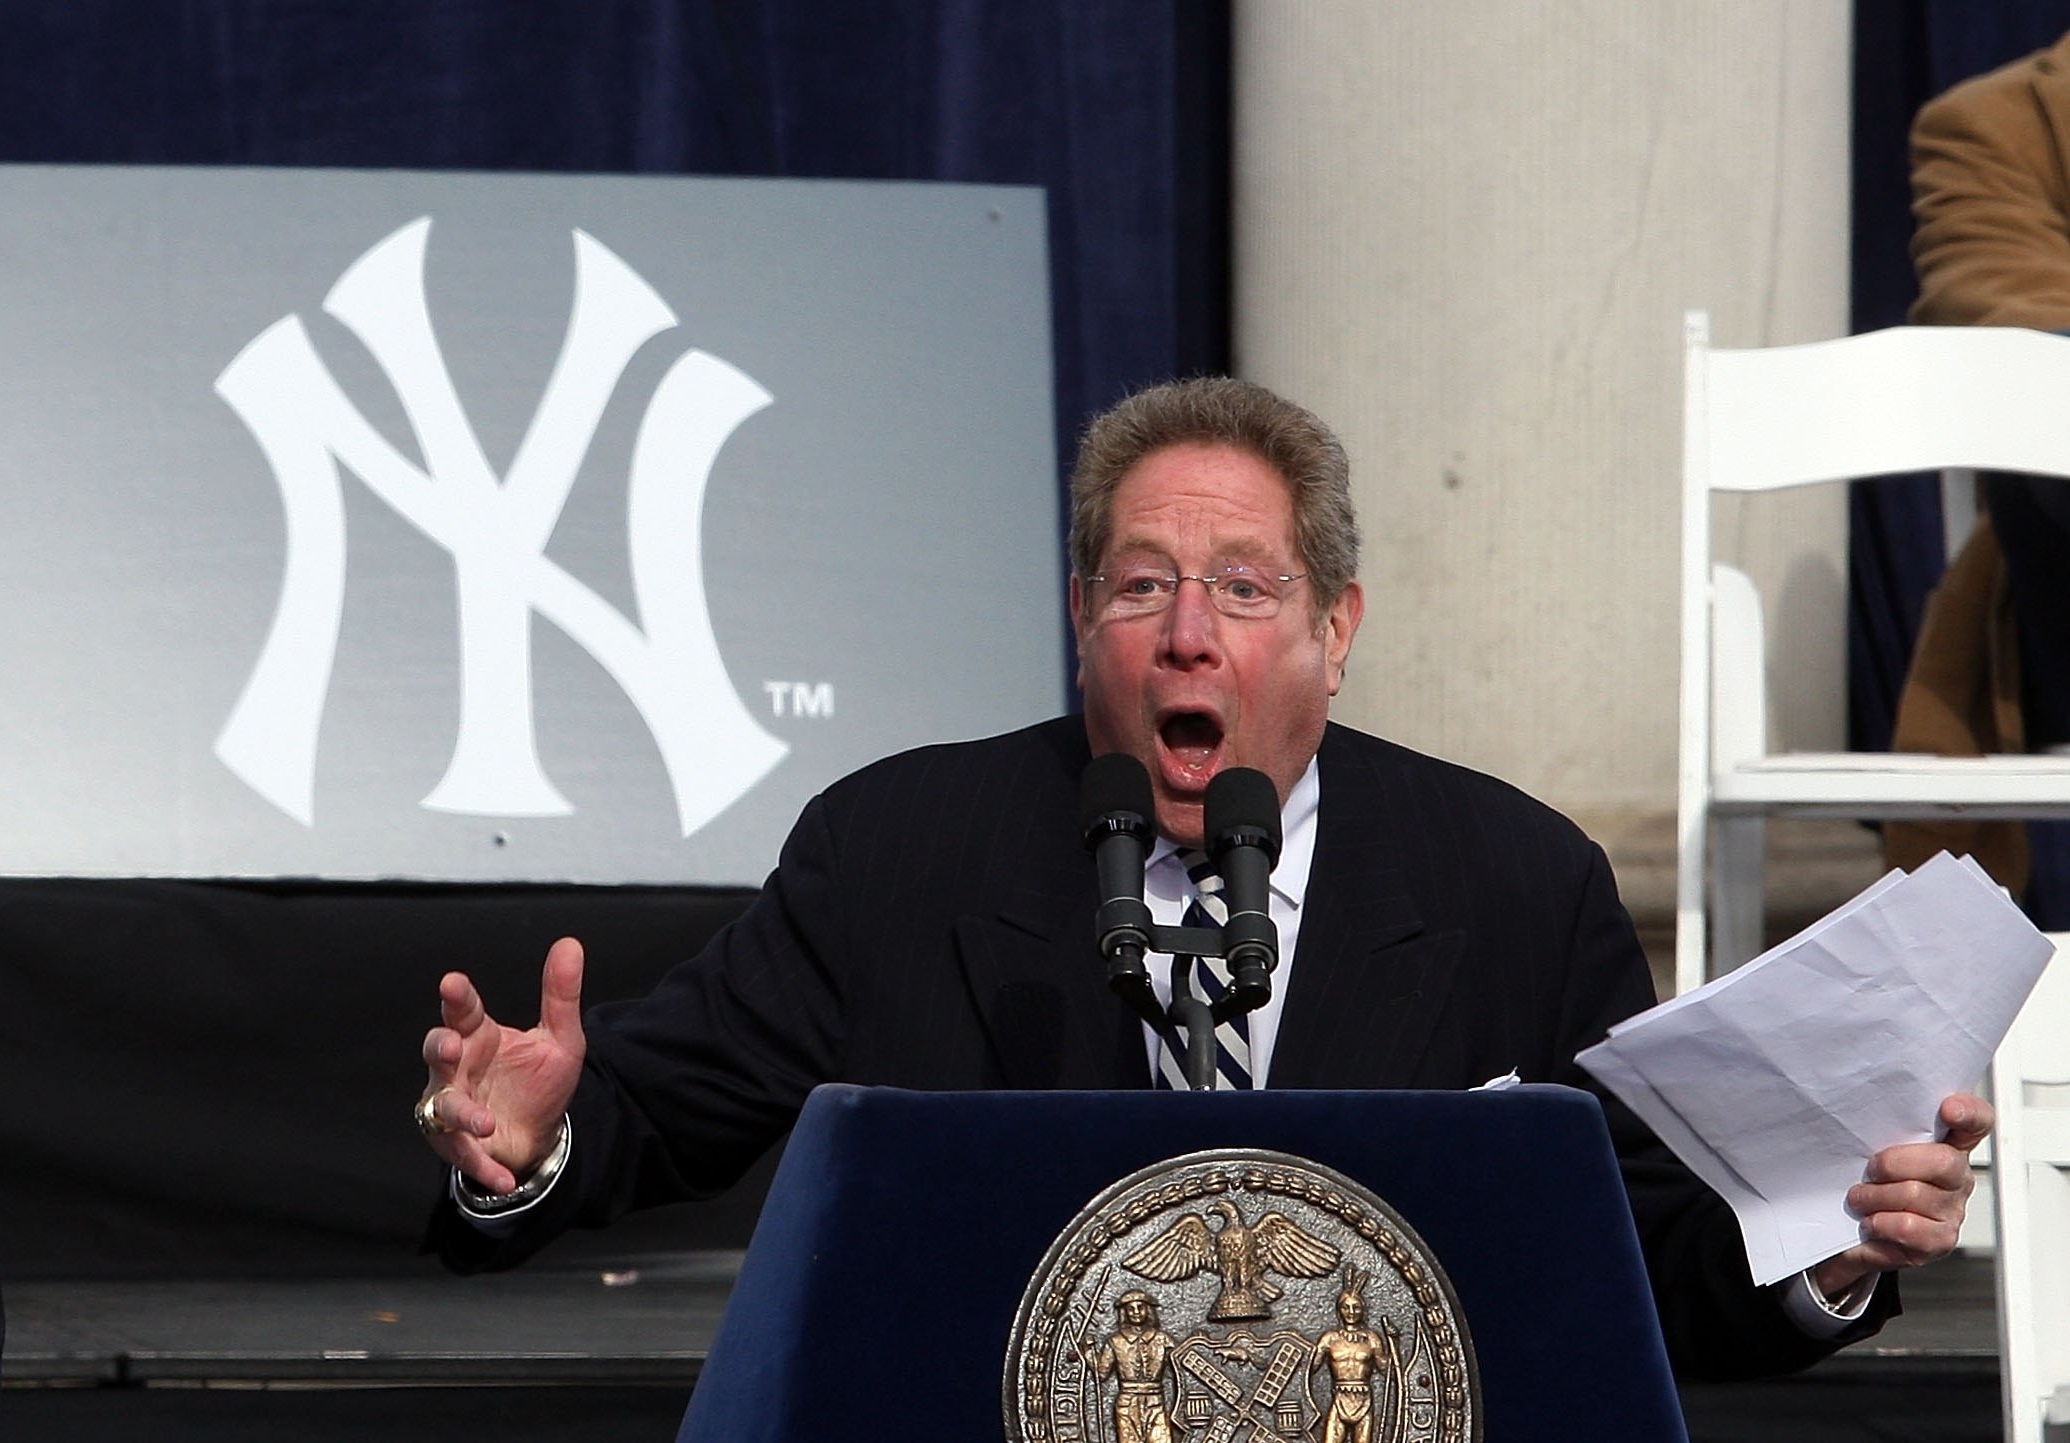 NEW YORK - NOVEMBER 06: New York Yankees broadcasters Michael Kay (L) and John Sterling speak during the New York Yankees World Series Victory Celebration at City Hall on November 6, 2009 in New York, New York. (Photo by Jim McIsaac/Getty Images)